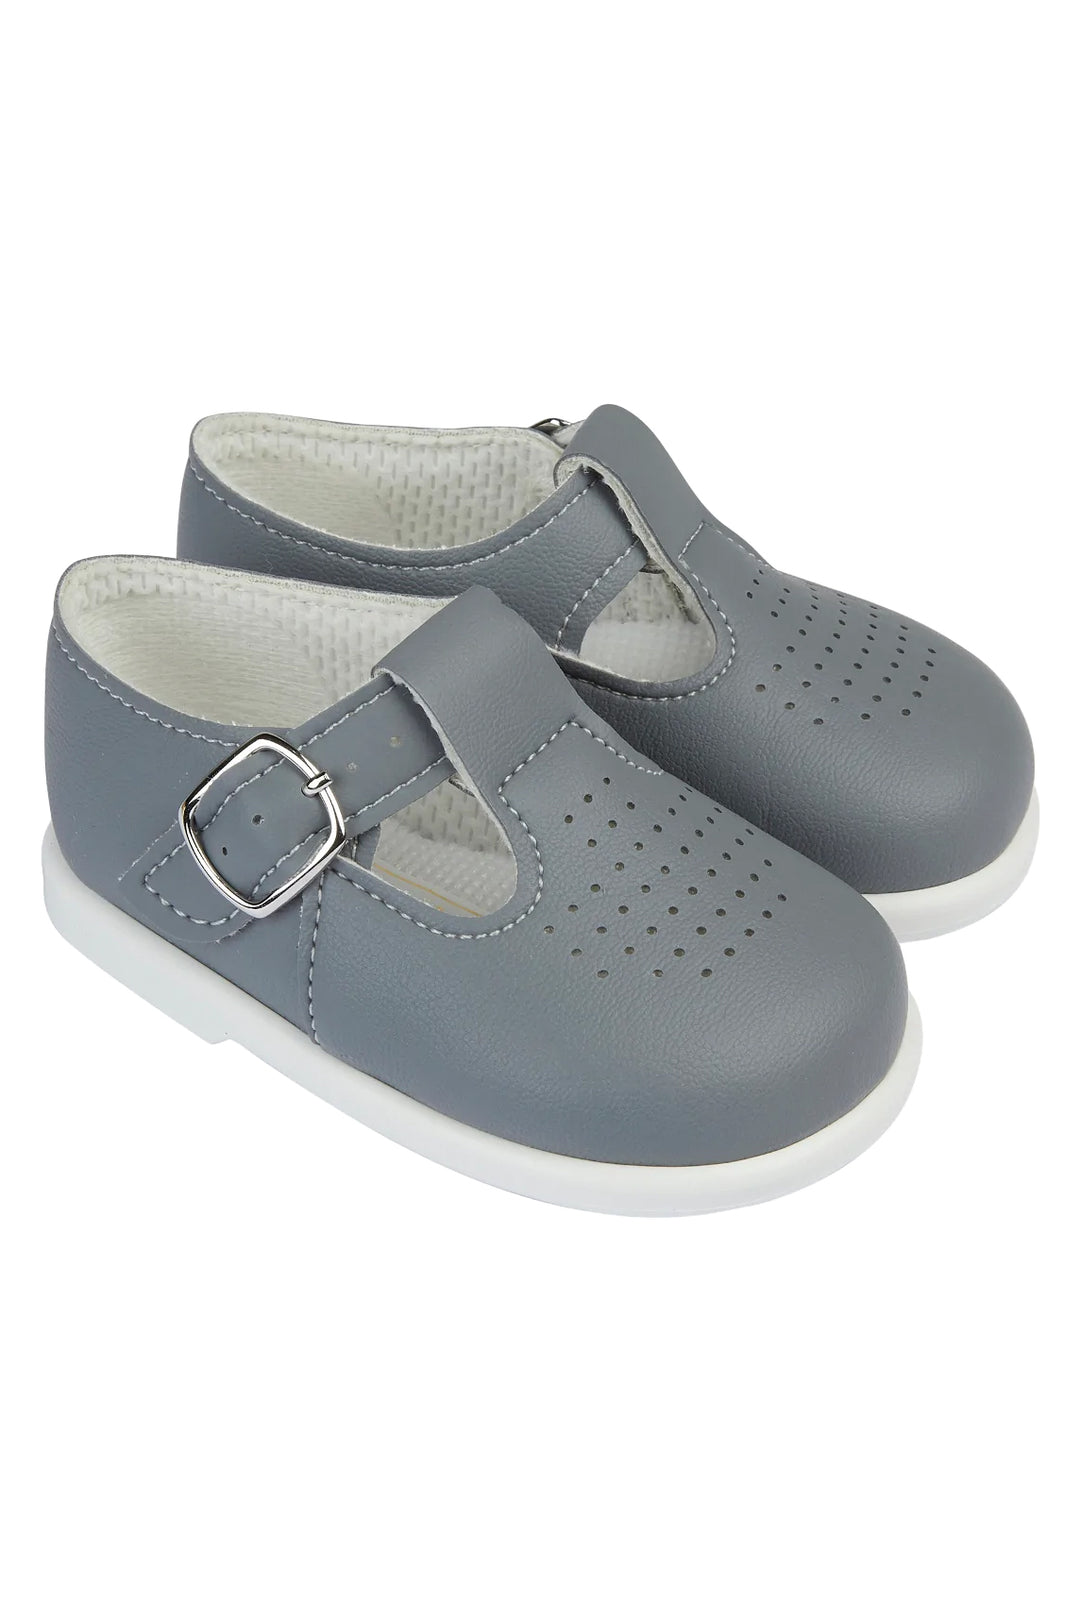 Baypods Grey T-Bar Hard Sole Shoes | Millie and John